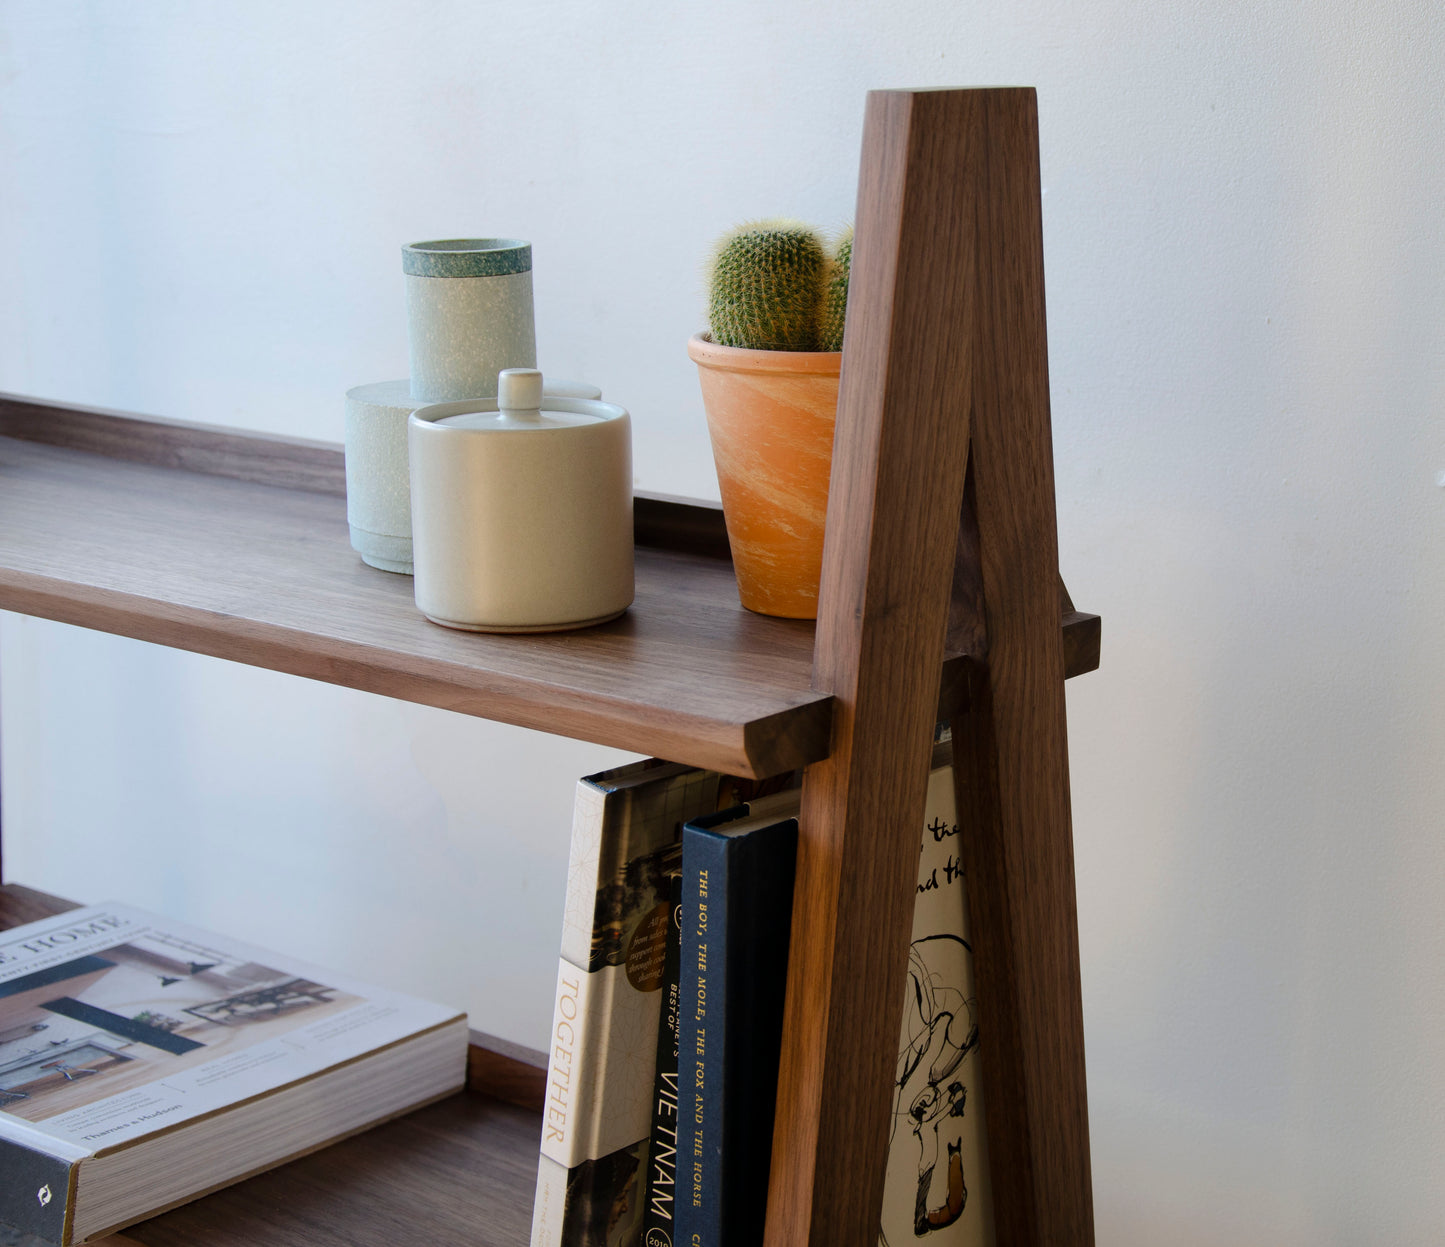 A-frame Bookcase Display Unit